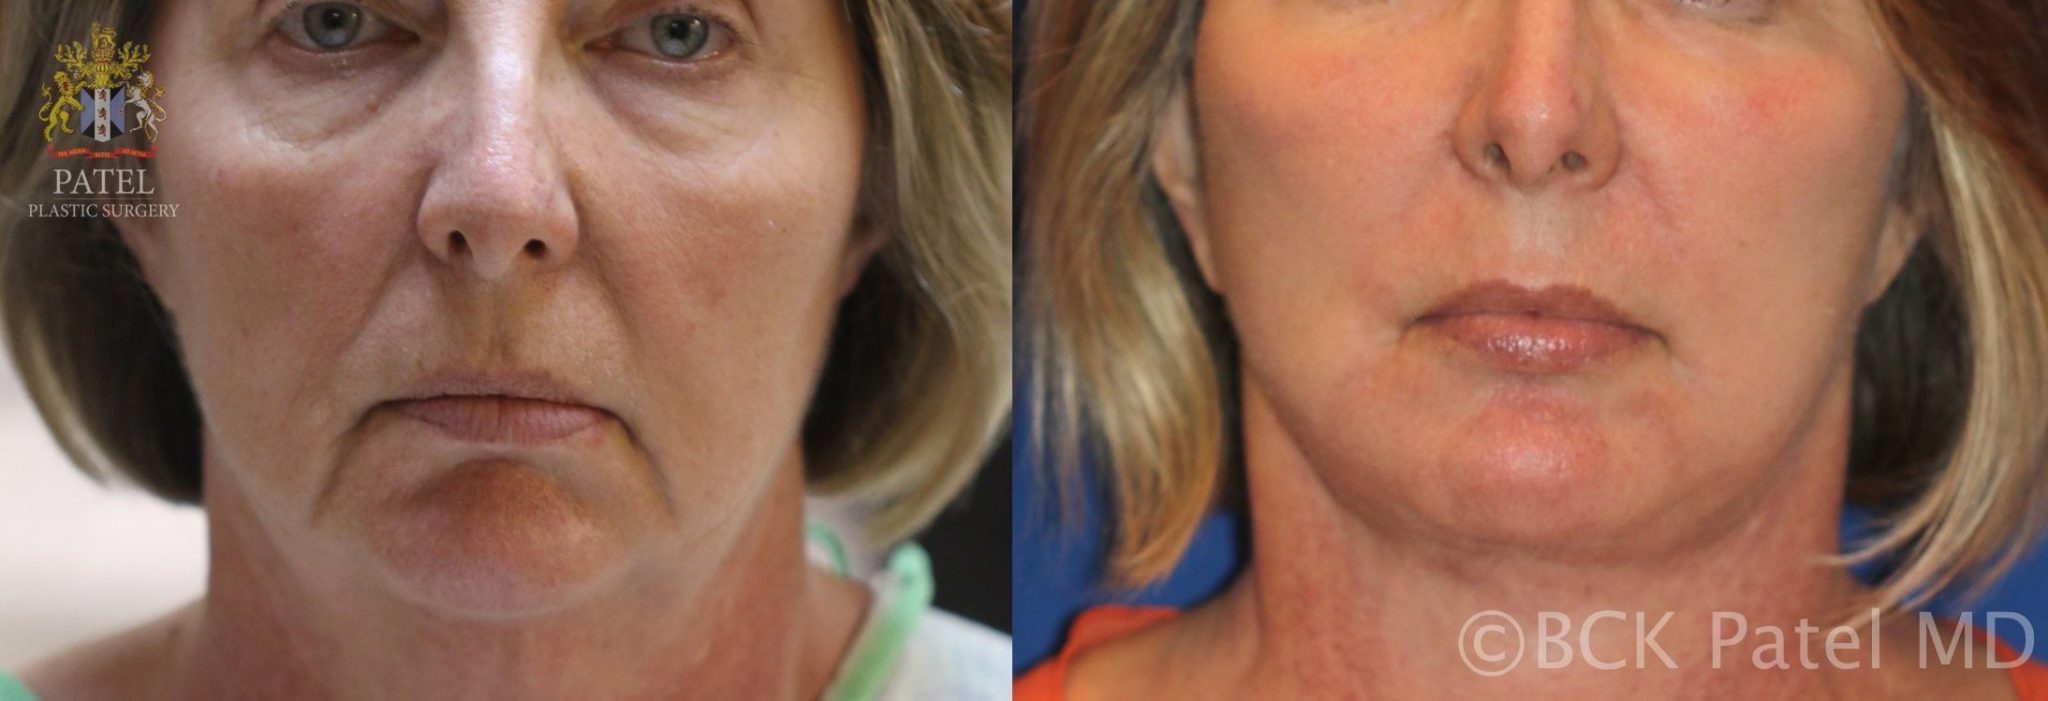 englishsurgeon.com. Photos show improvement in the upper lip length and lines as well as fullness by Dr. BCK Patel MD, FRCS, Salt Lake City, St George